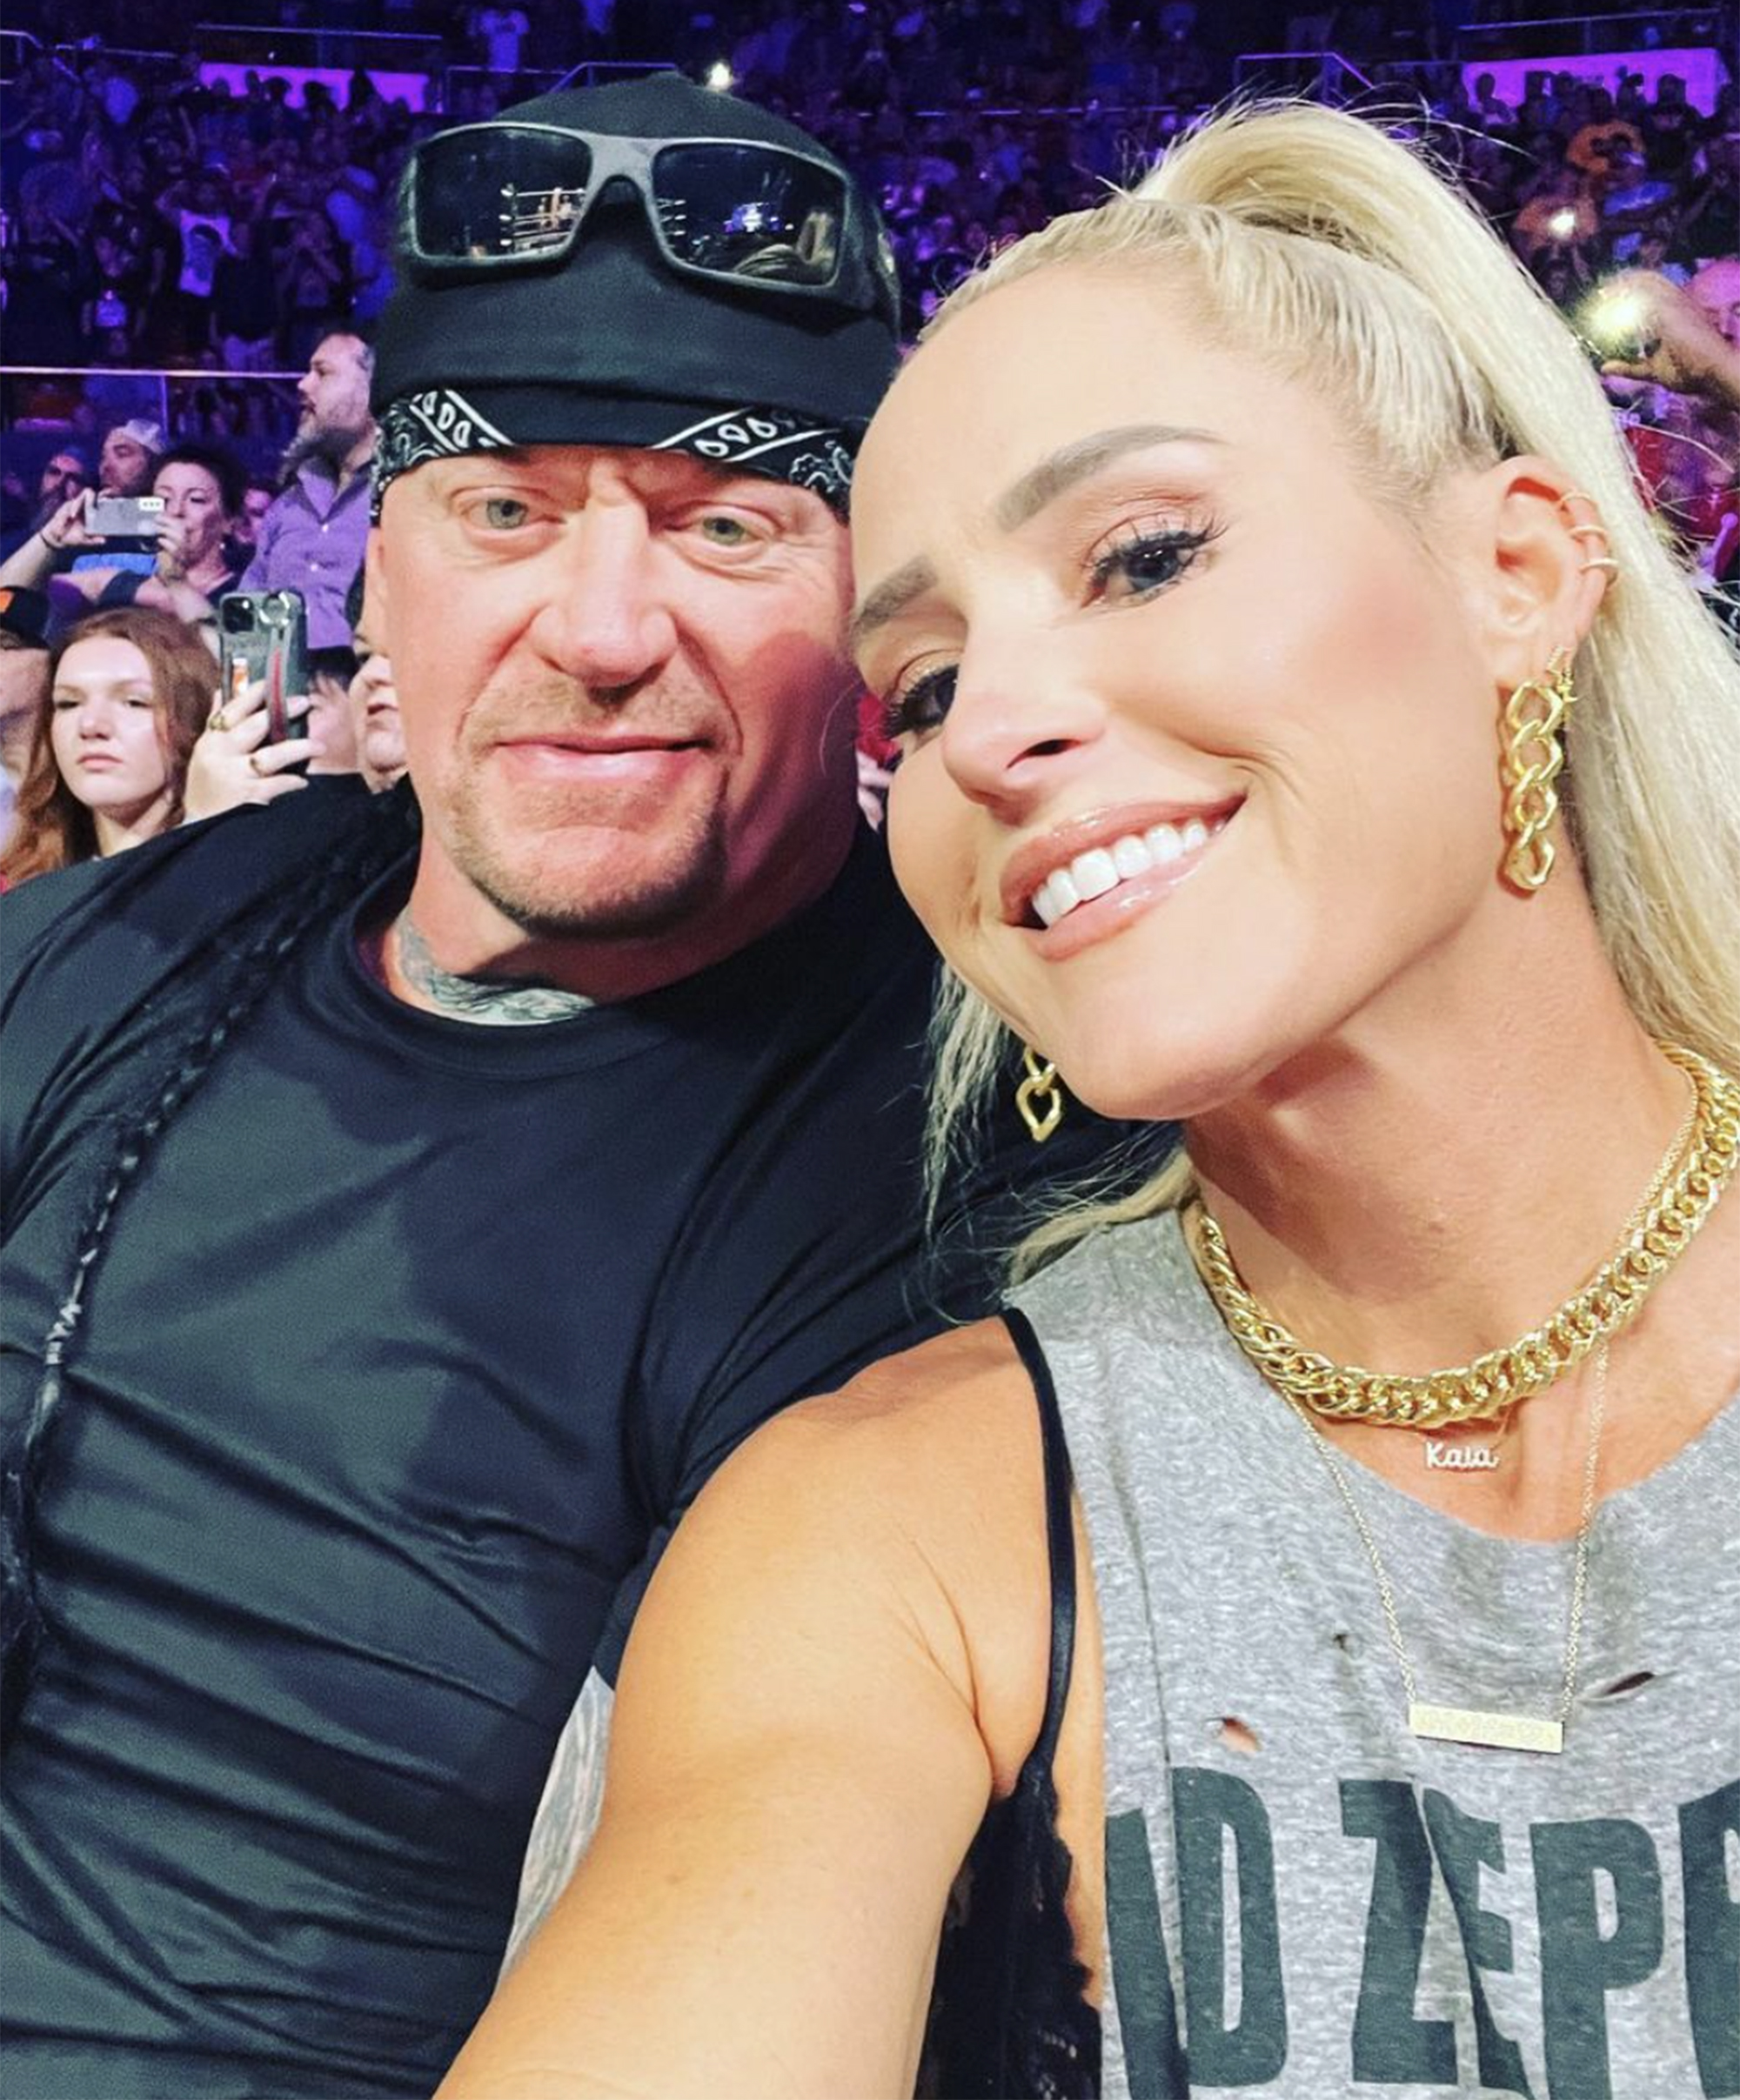 cecep cahyadi recommends wwe michelle mccool nude pic